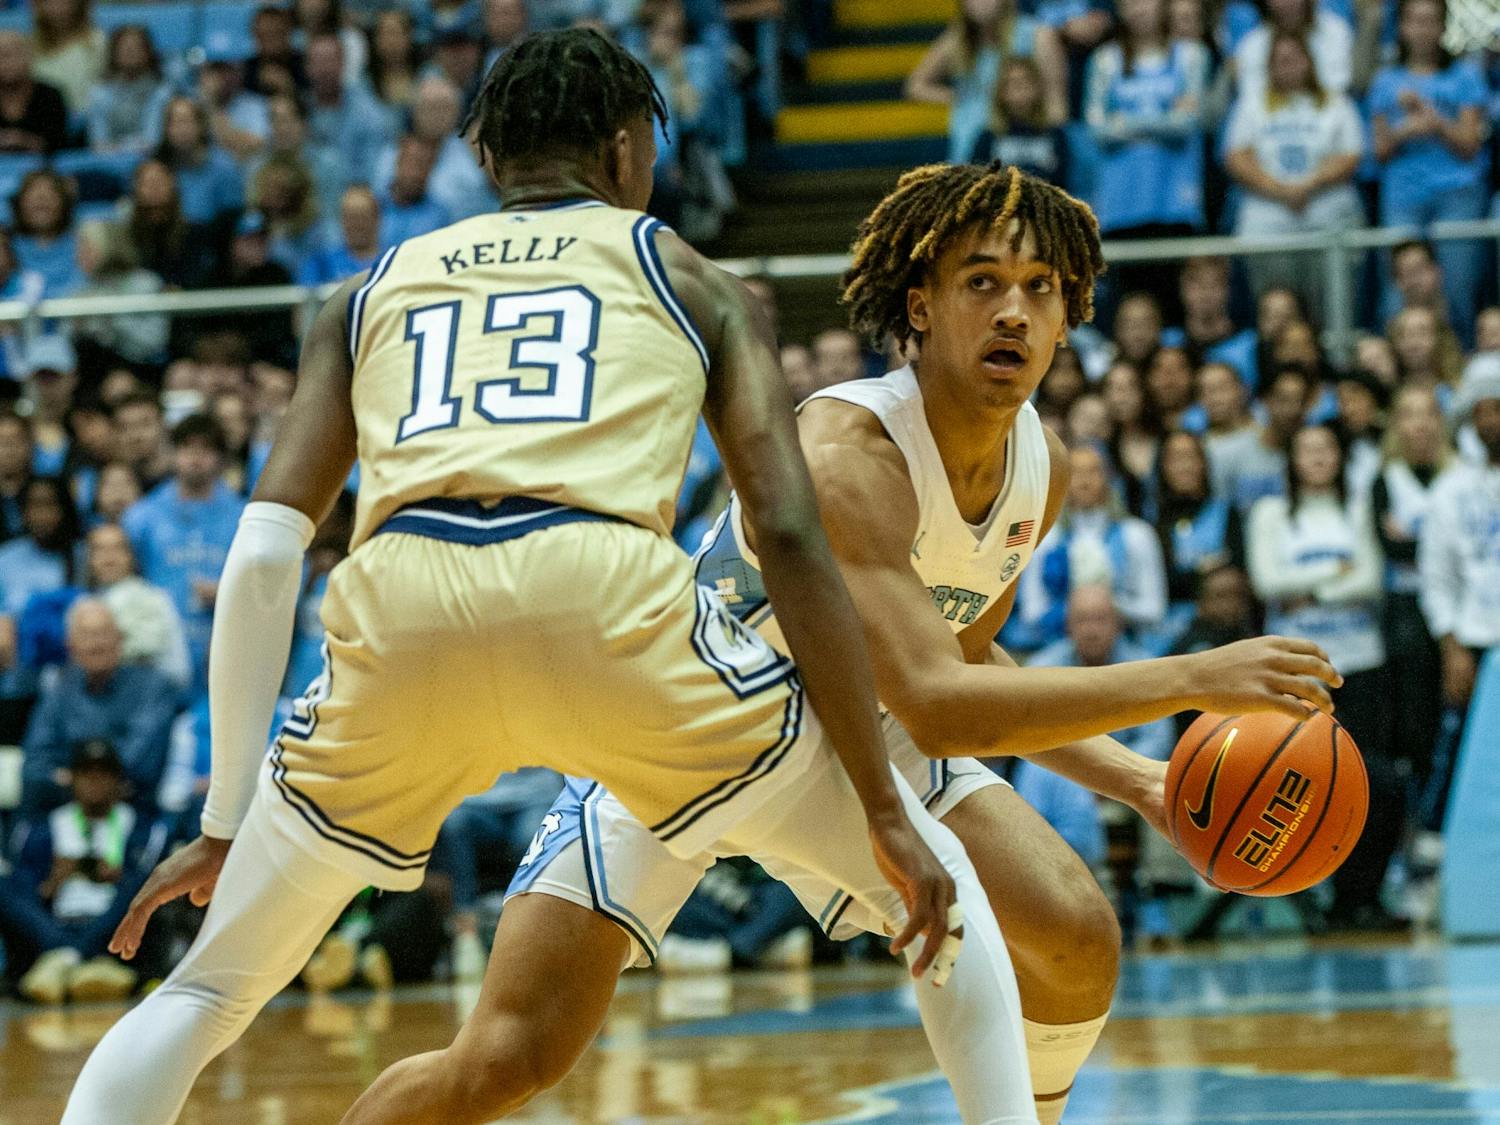 UNC first-year guard Seth Trimble (0) guards the ball from Georgia Tech sophomore guard Miles Kelly (13) during the men's basketball game against Georgia Tech in the Dean Smith Center on Saturday, Dec. 10, 2022. UNC beat Georgia Tech 75-59.